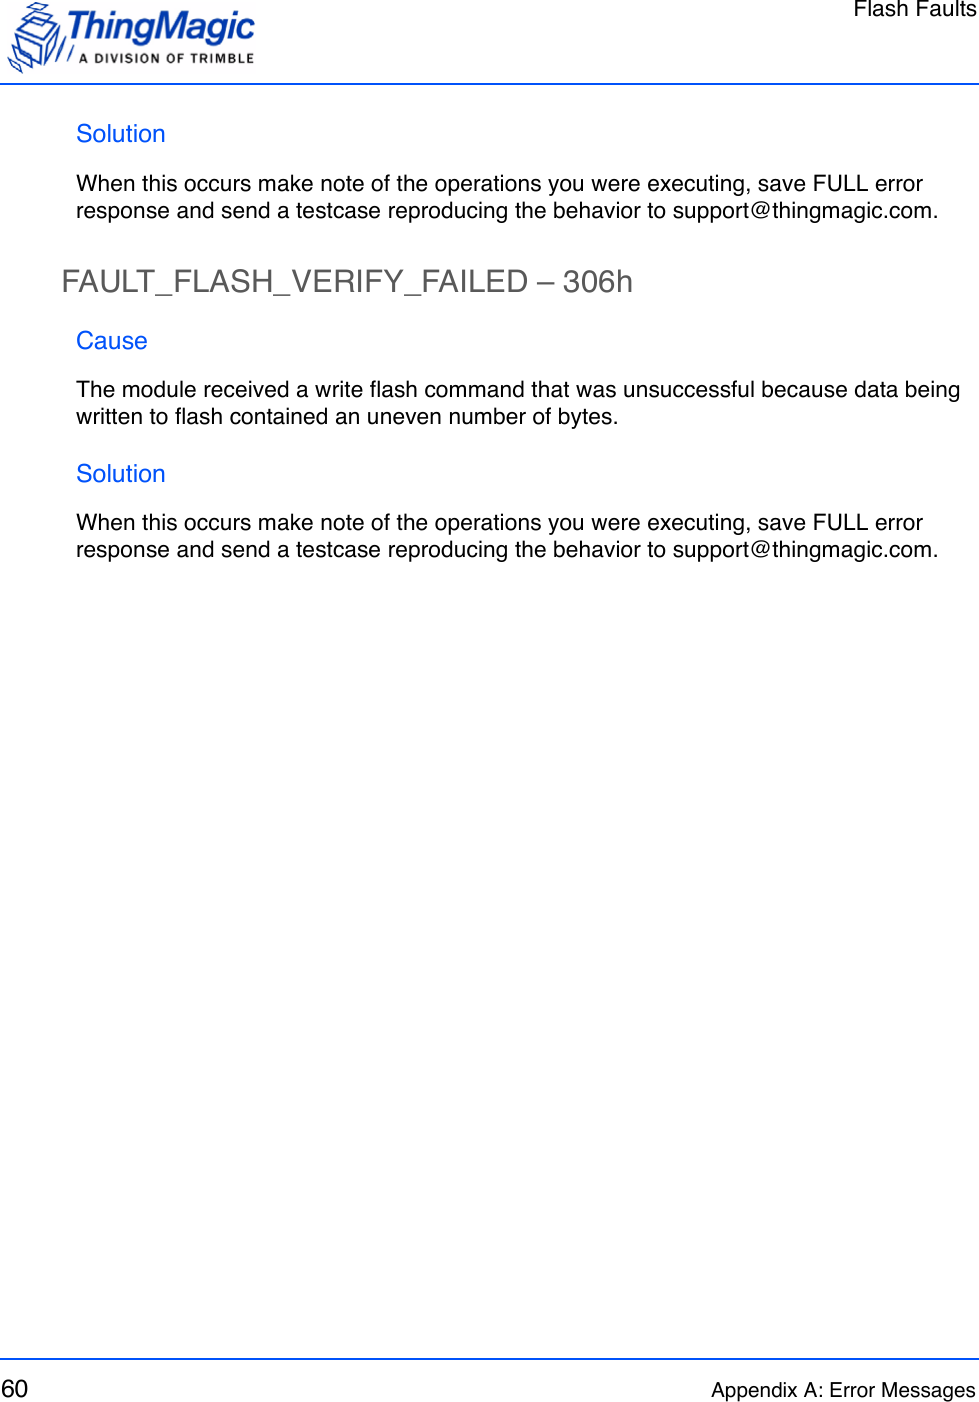 Flash Faults60 Appendix A: Error MessagesSolutionWhen this occurs make note of the operations you were executing, save FULL error response and send a testcase reproducing the behavior to support@thingmagic.com.FAULT_FLASH_VERIFY_FAILED – 306hCauseThe module received a write flash command that was unsuccessful because data being written to flash contained an uneven number of bytes.SolutionWhen this occurs make note of the operations you were executing, save FULL error response and send a testcase reproducing the behavior to support@thingmagic.com.